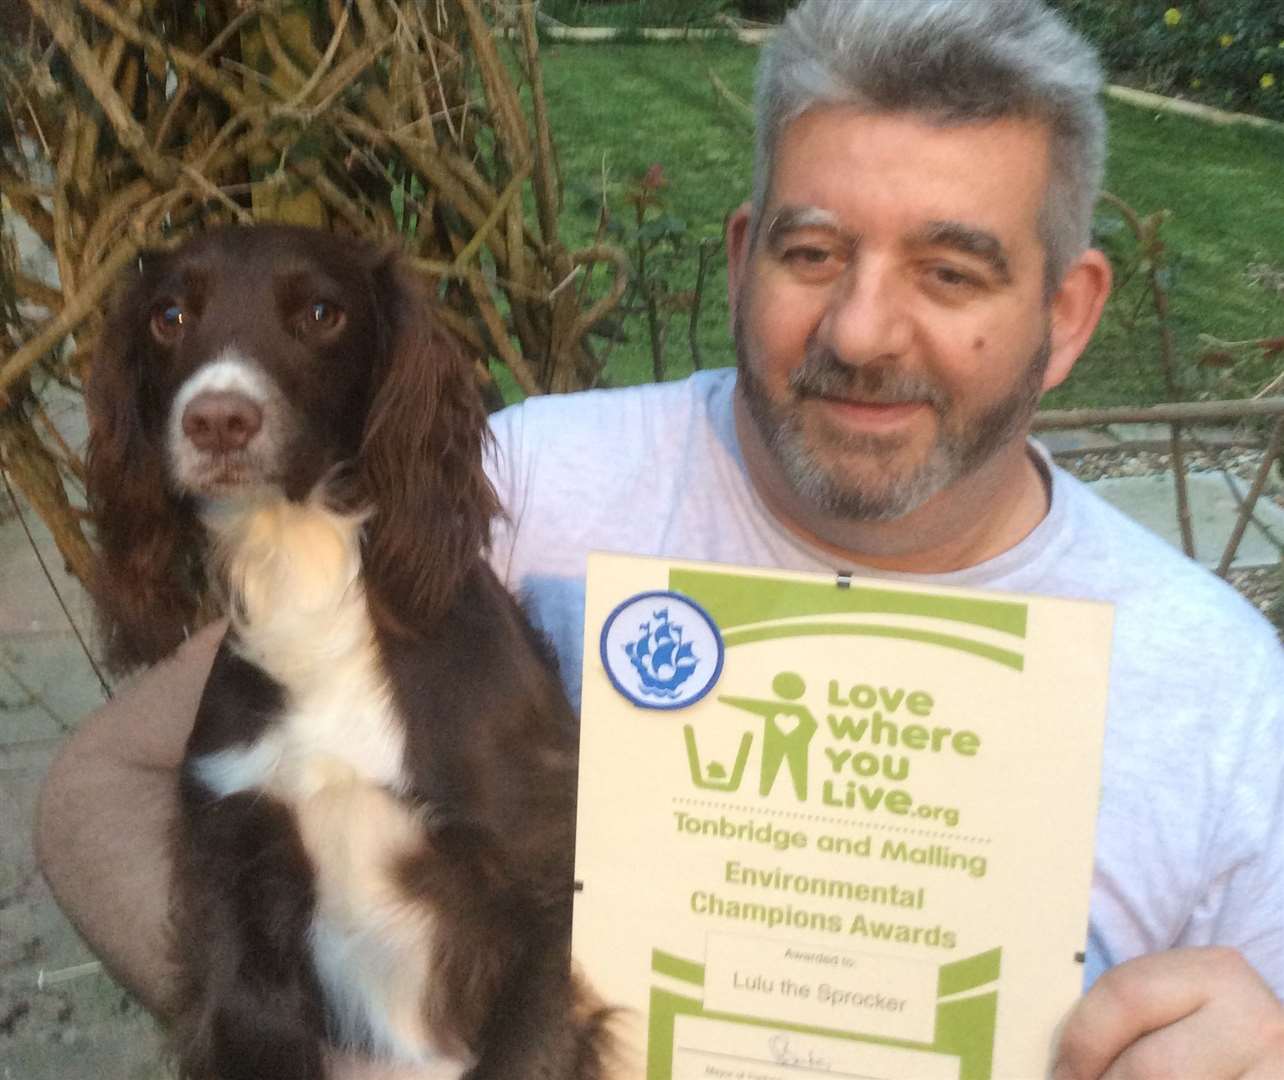 Gary Longley trained Lulu to pick up litter in their local park two years ago